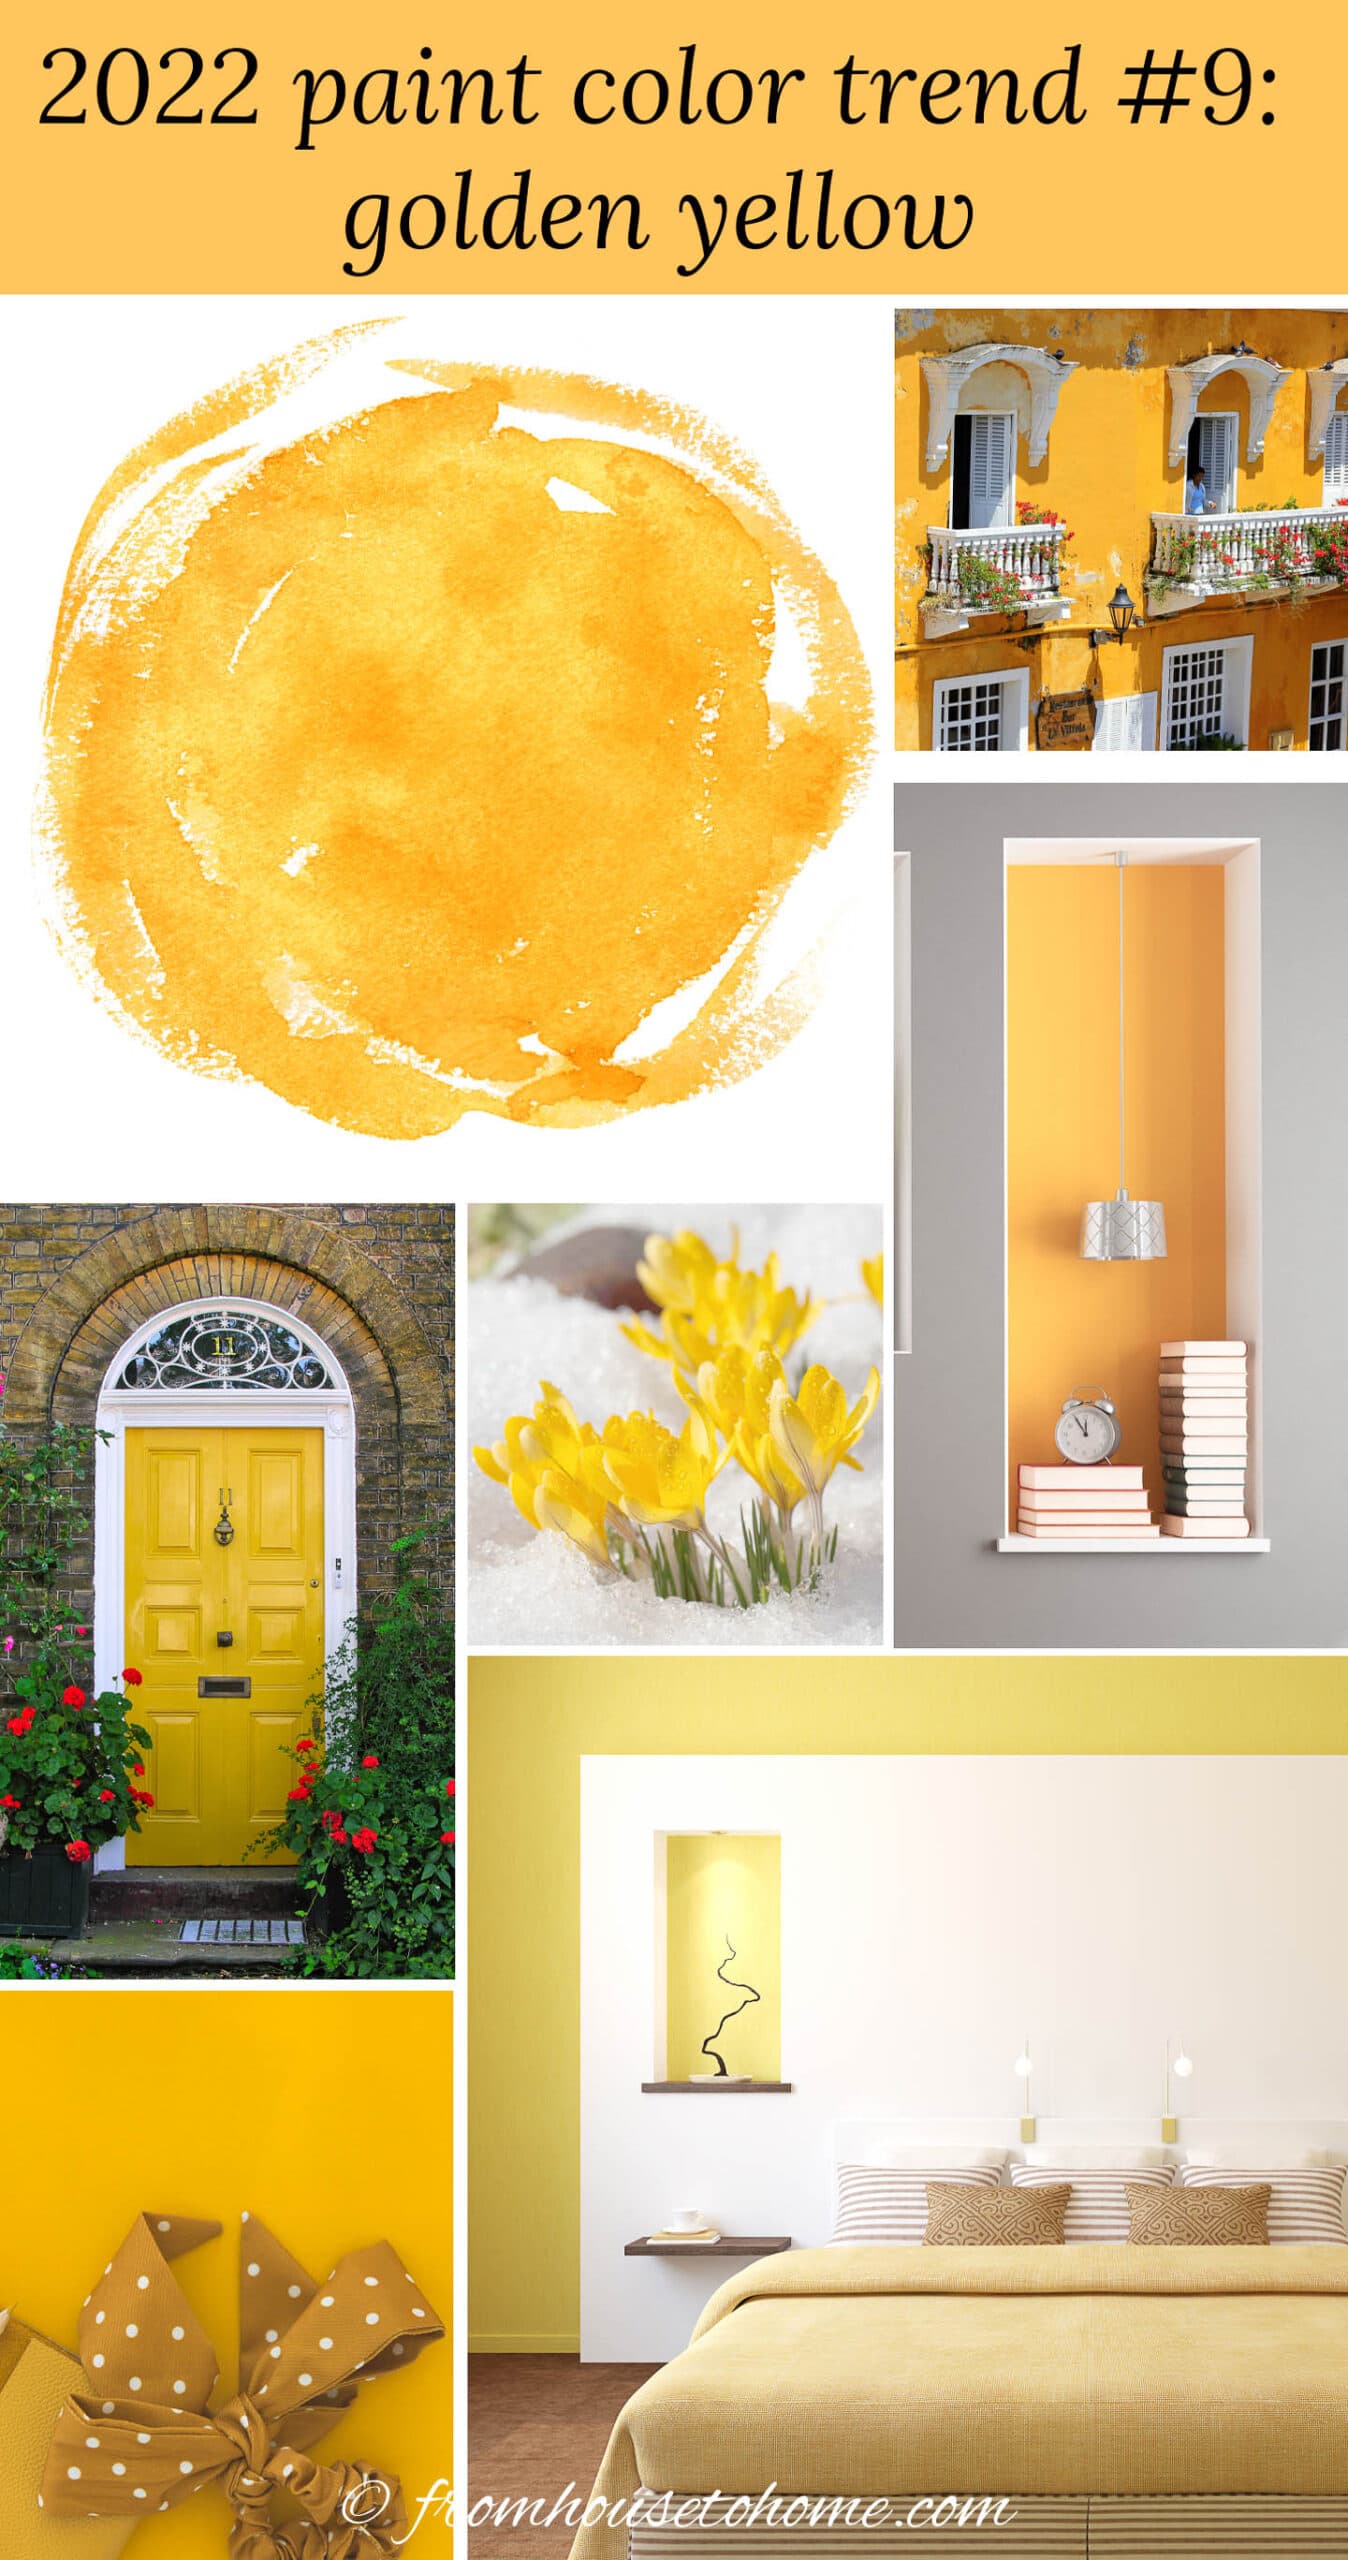 examples of golden yellow colors including a paint swatch, a building painted in golden yellow, a cubby painted yellow with a gray surround, yellow crocuses, a door painted bright yellow, a bedroom painted in light yellow, and a present with golden yellow paper